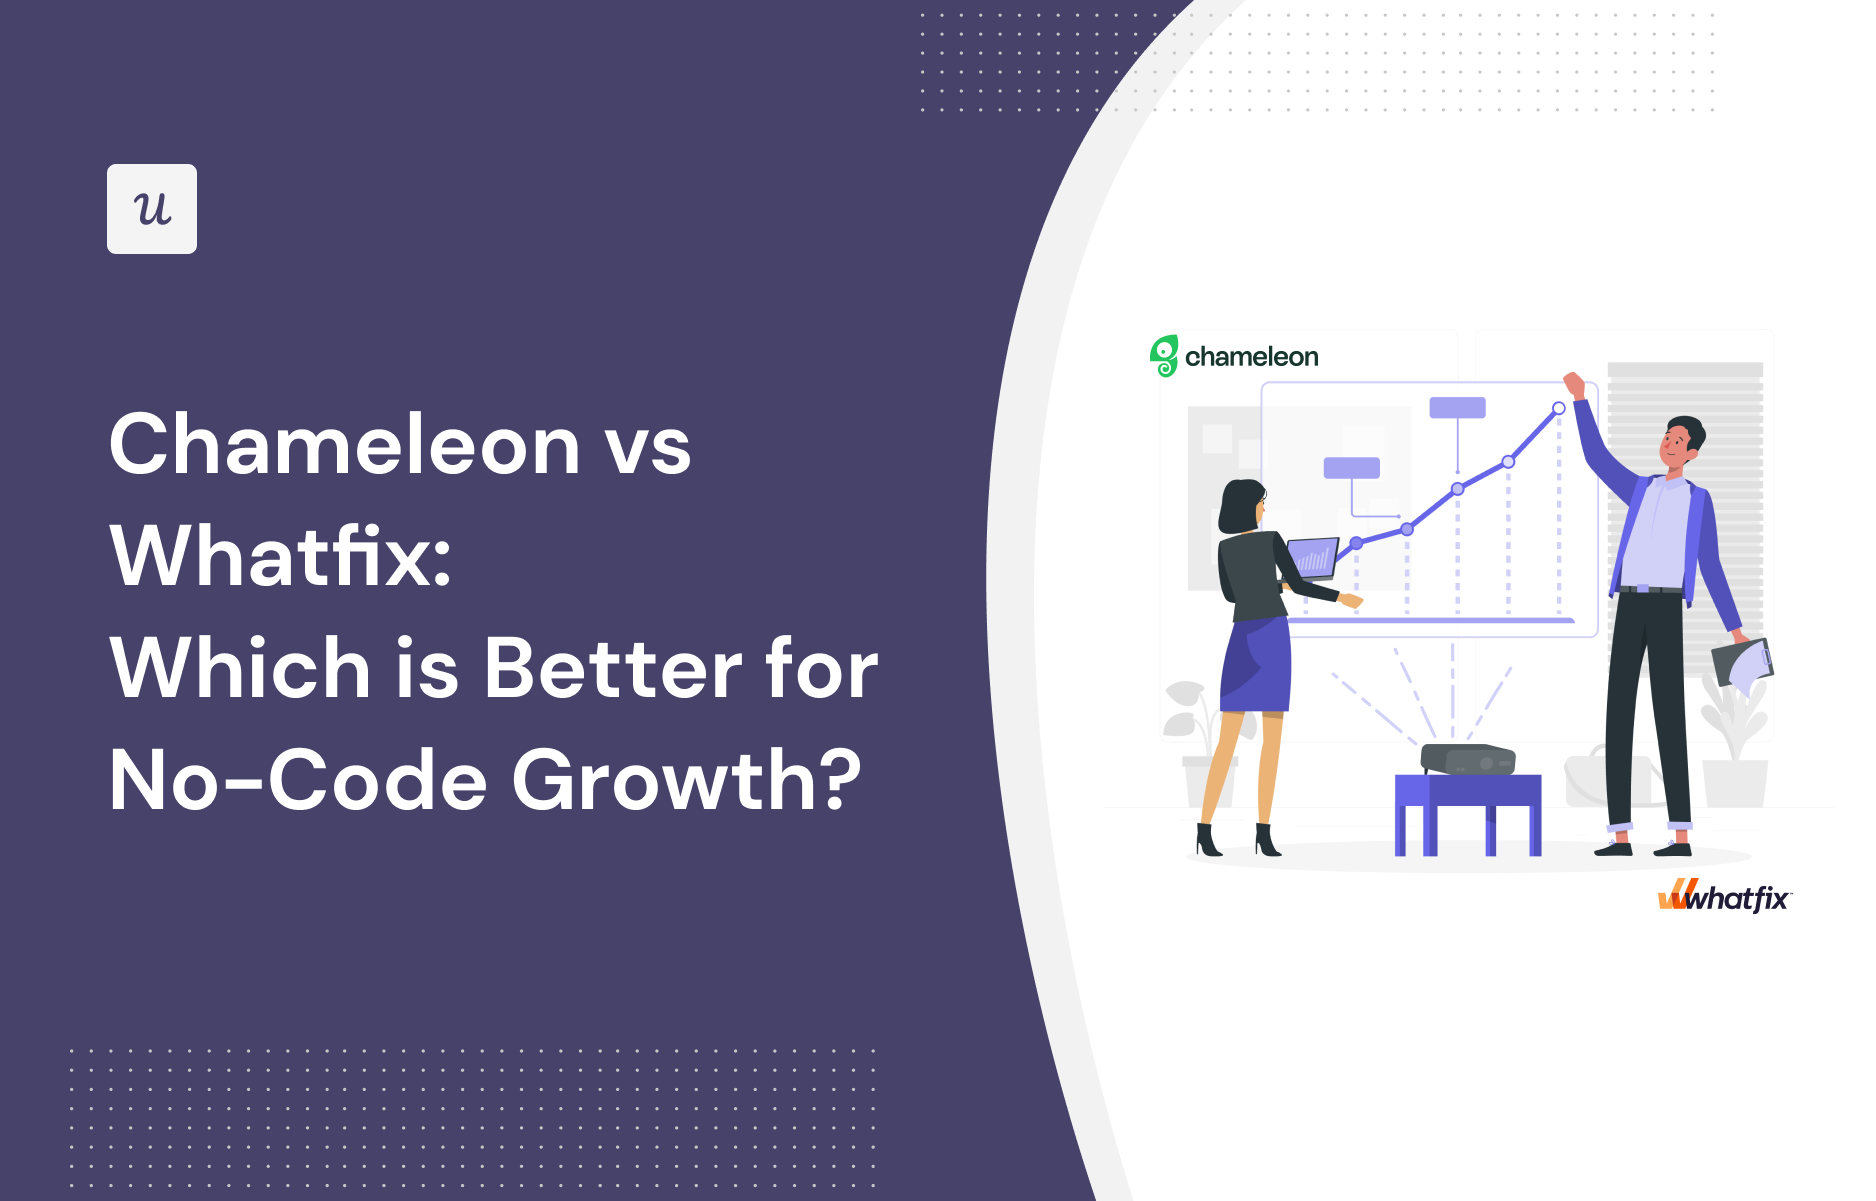 Chameleon vs Whatfix: Which is Better for No-Code Growth?